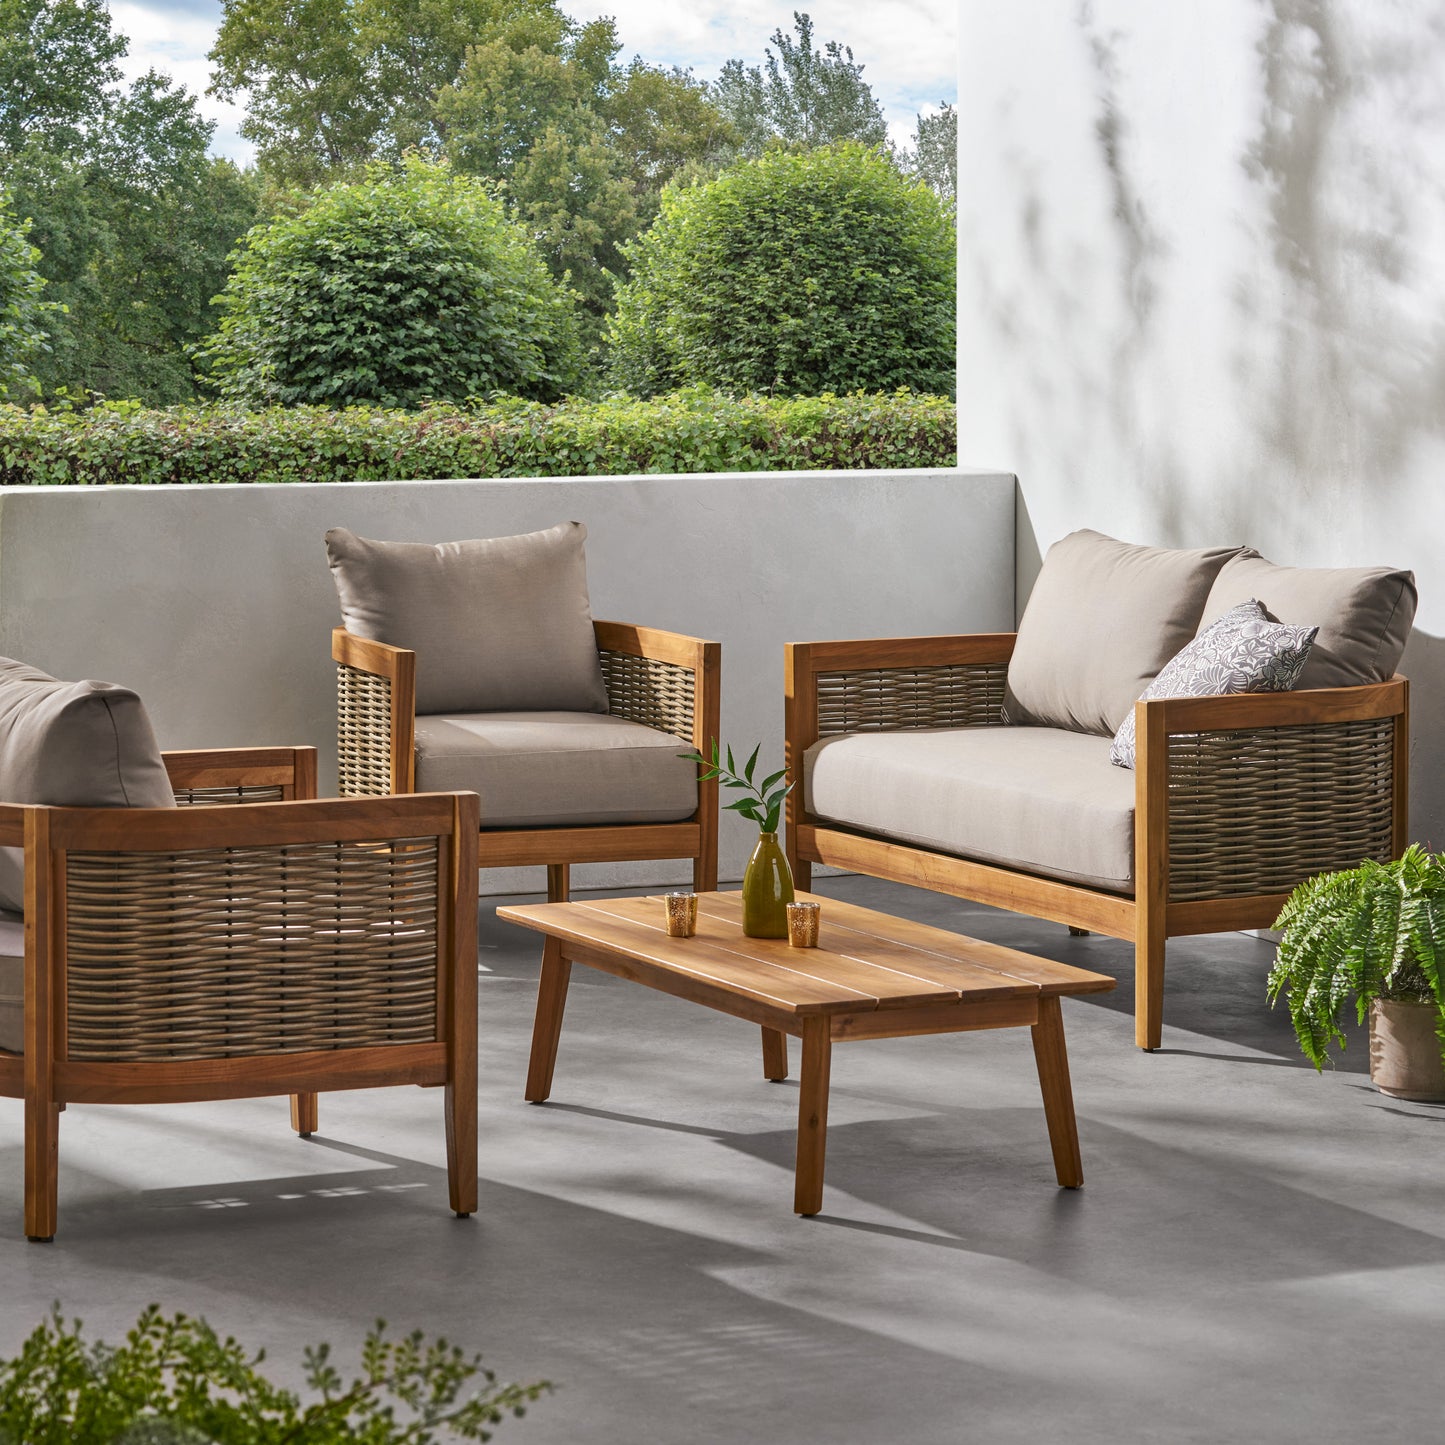 The Crowne Collection Outdoor Acacia Wood and Wicker 4 Seater Chat Set with Sunbrella Cushions